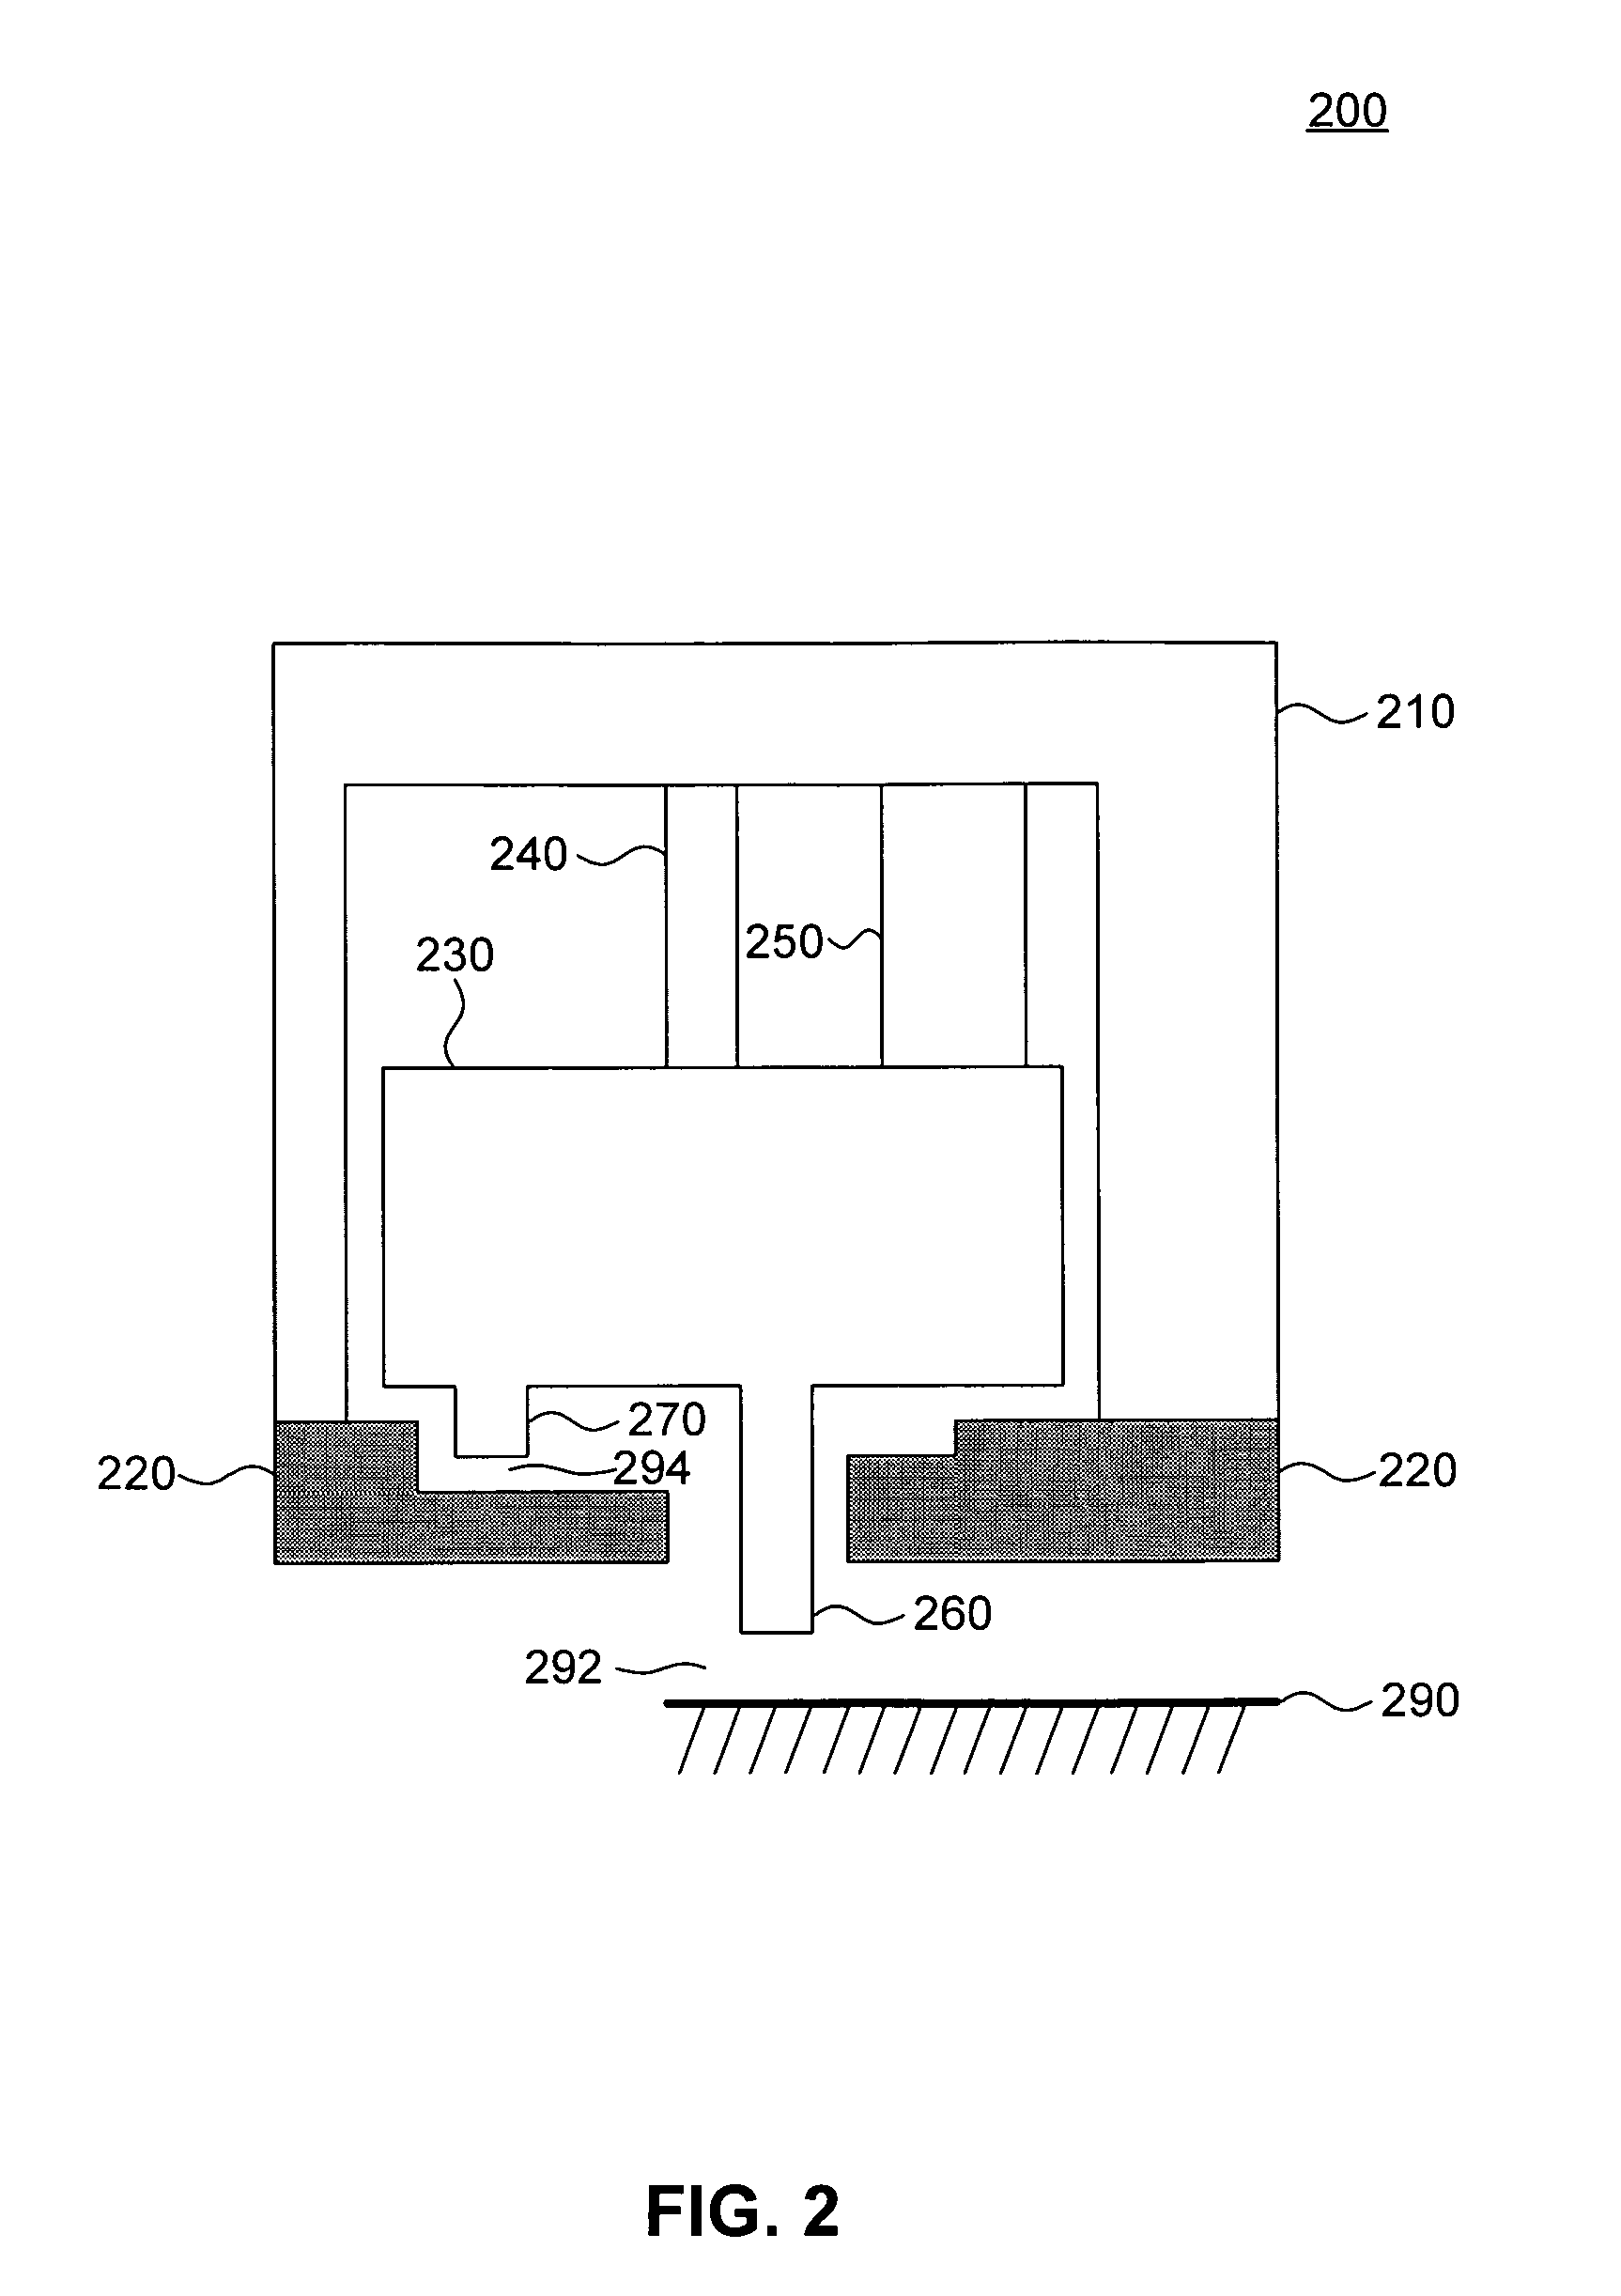 Proximity sensor with self compensation for mechanism instability